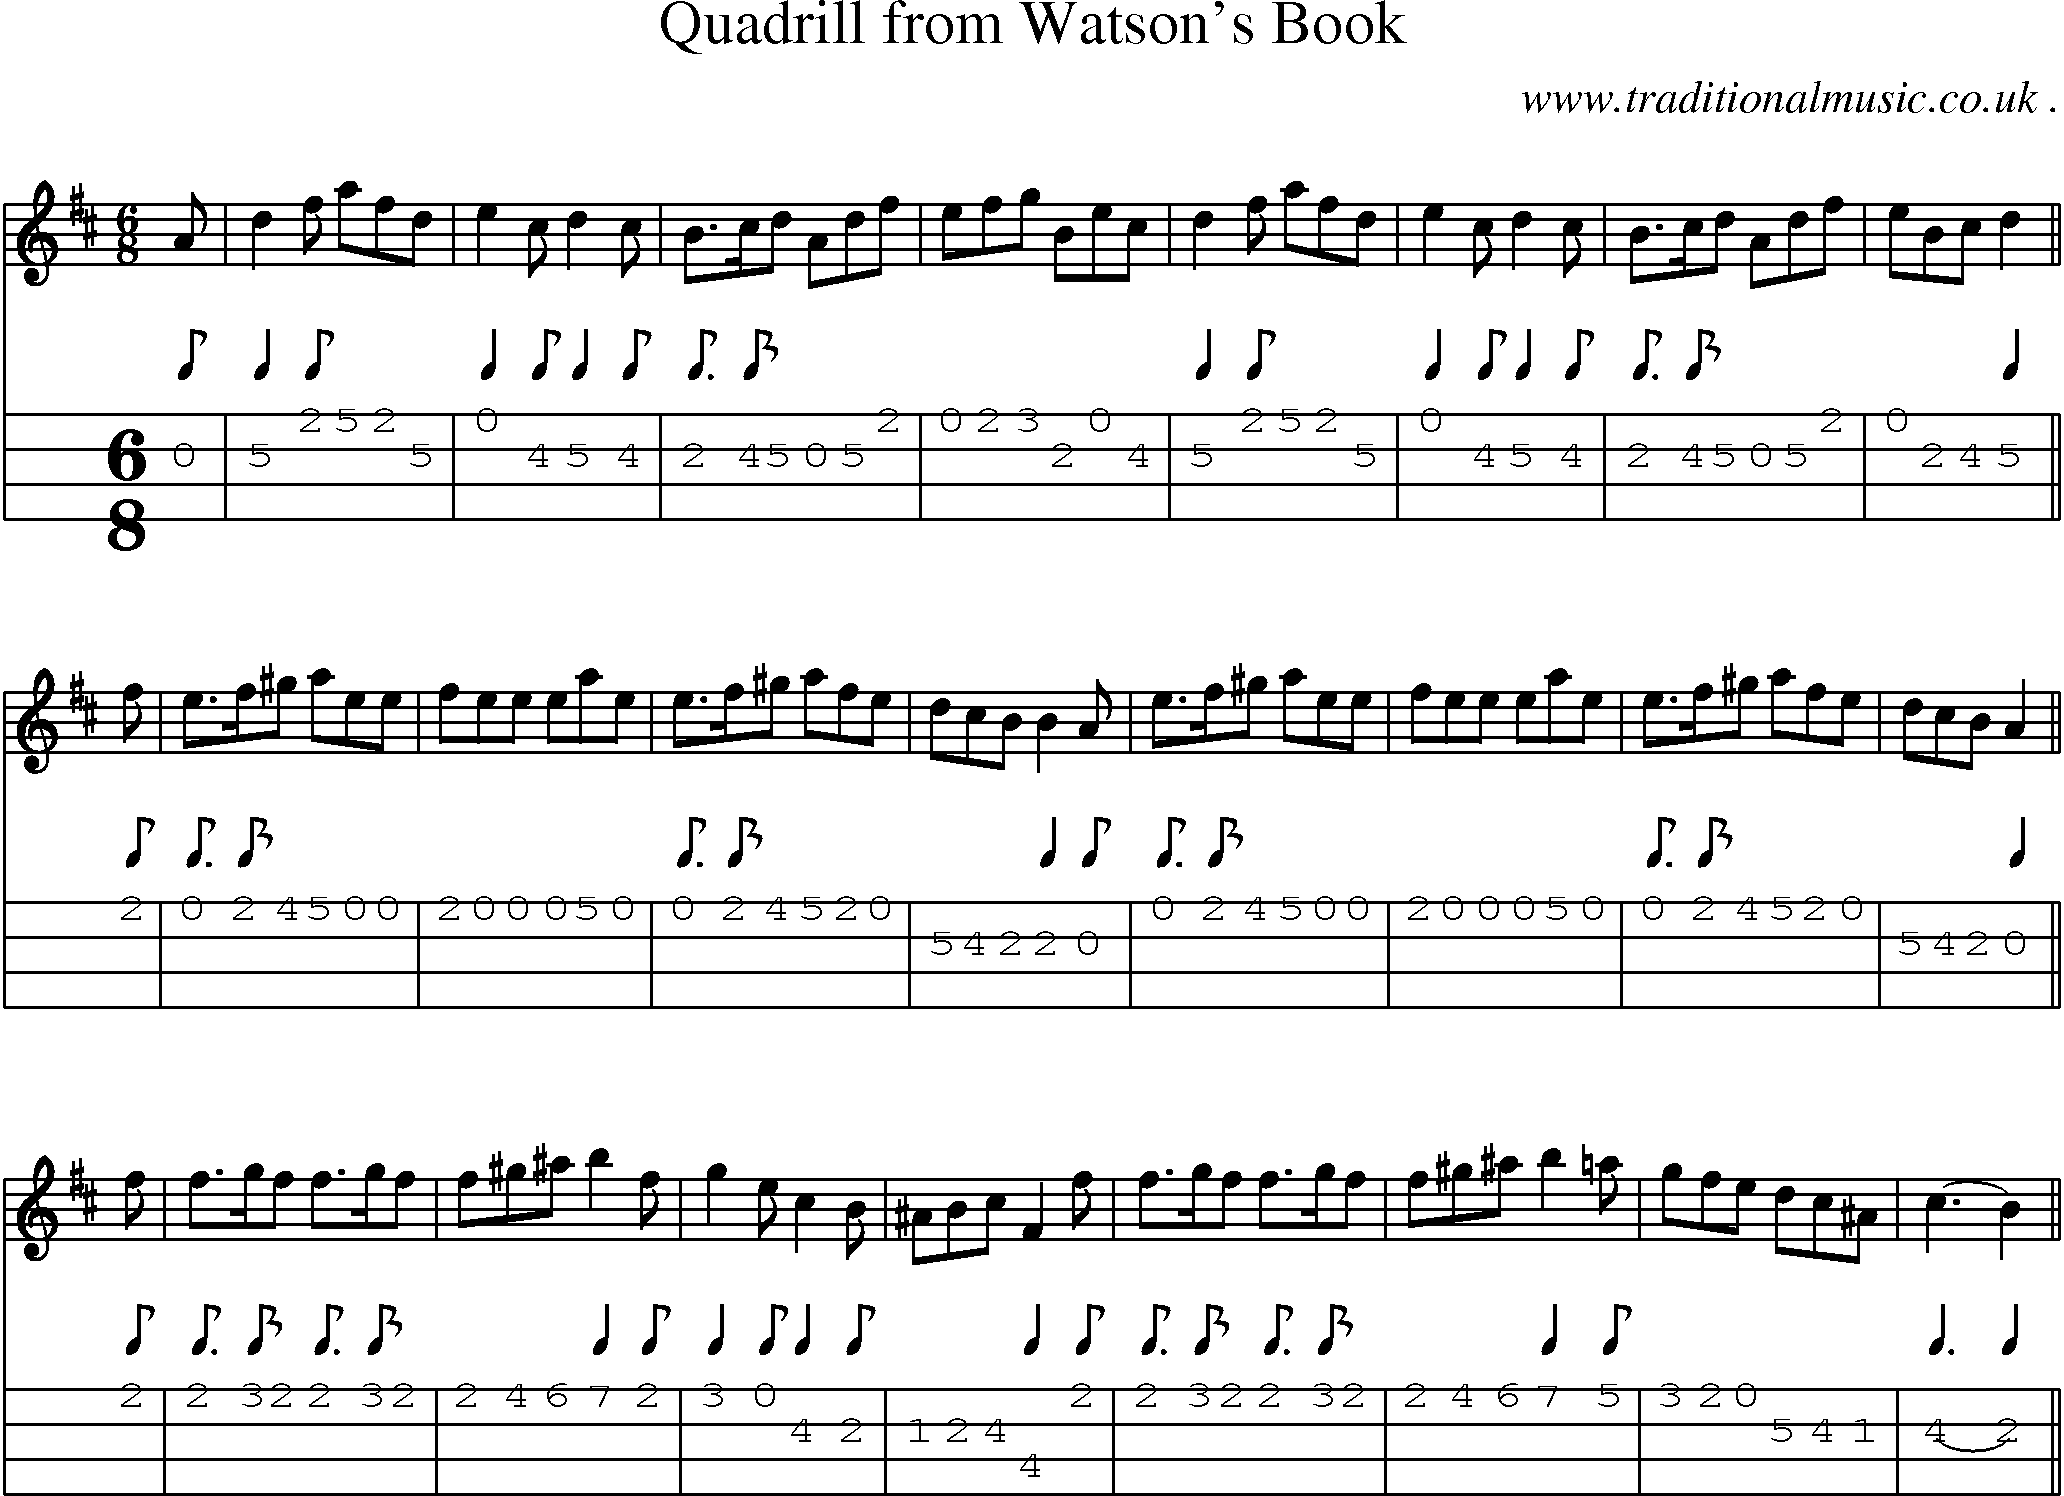 Sheet-Music and Mandolin Tabs for Quadrill From Watsons Book